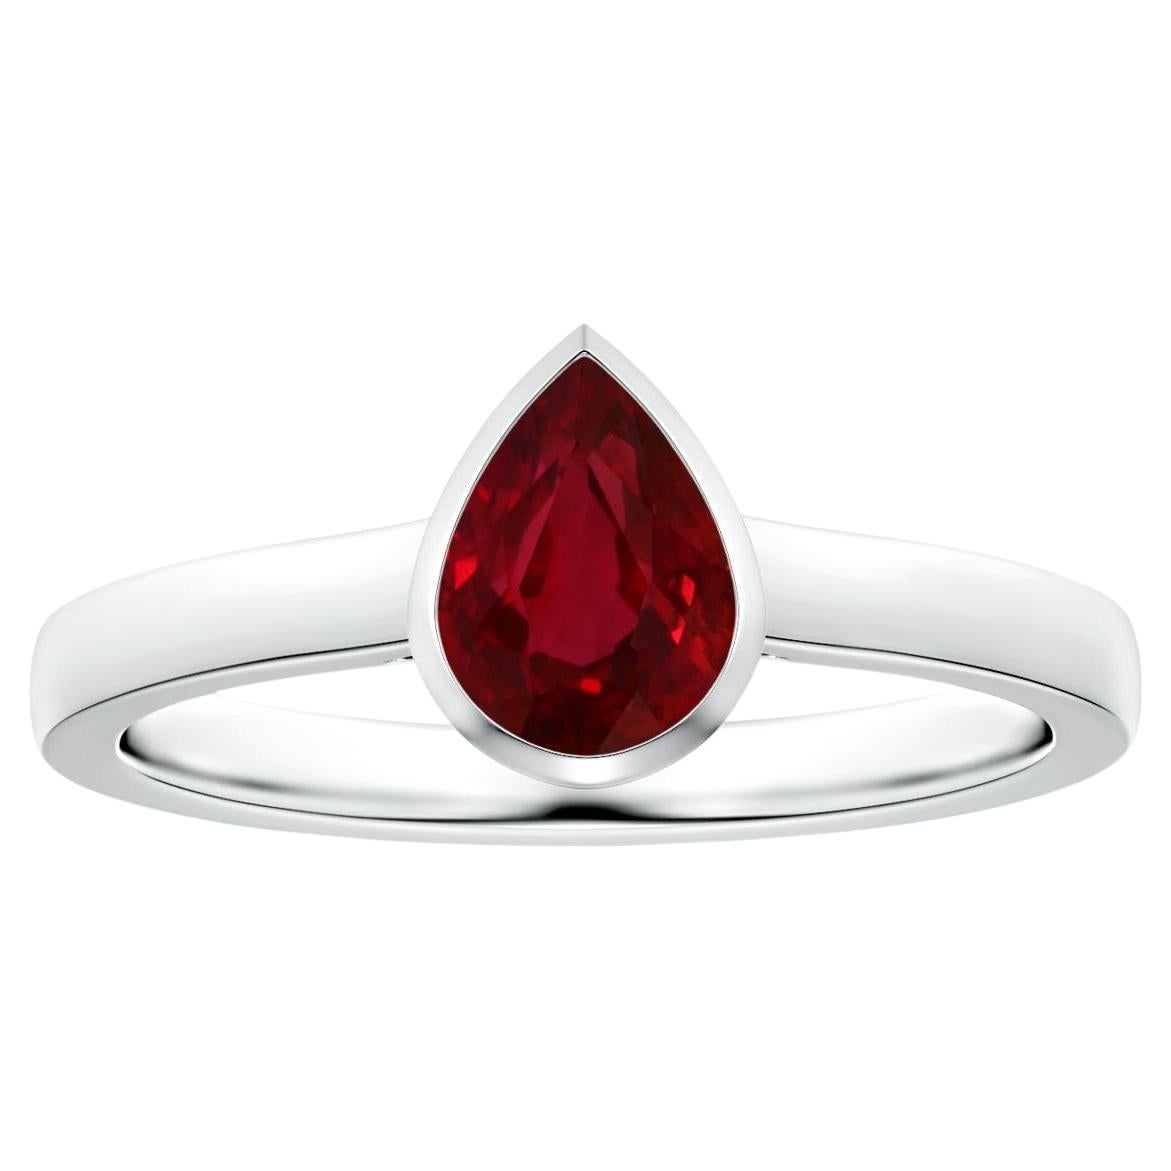 ANGARA Bezel-Set GIA Certified Pear-Shaped Ruby Solitaire Ring in White Gold